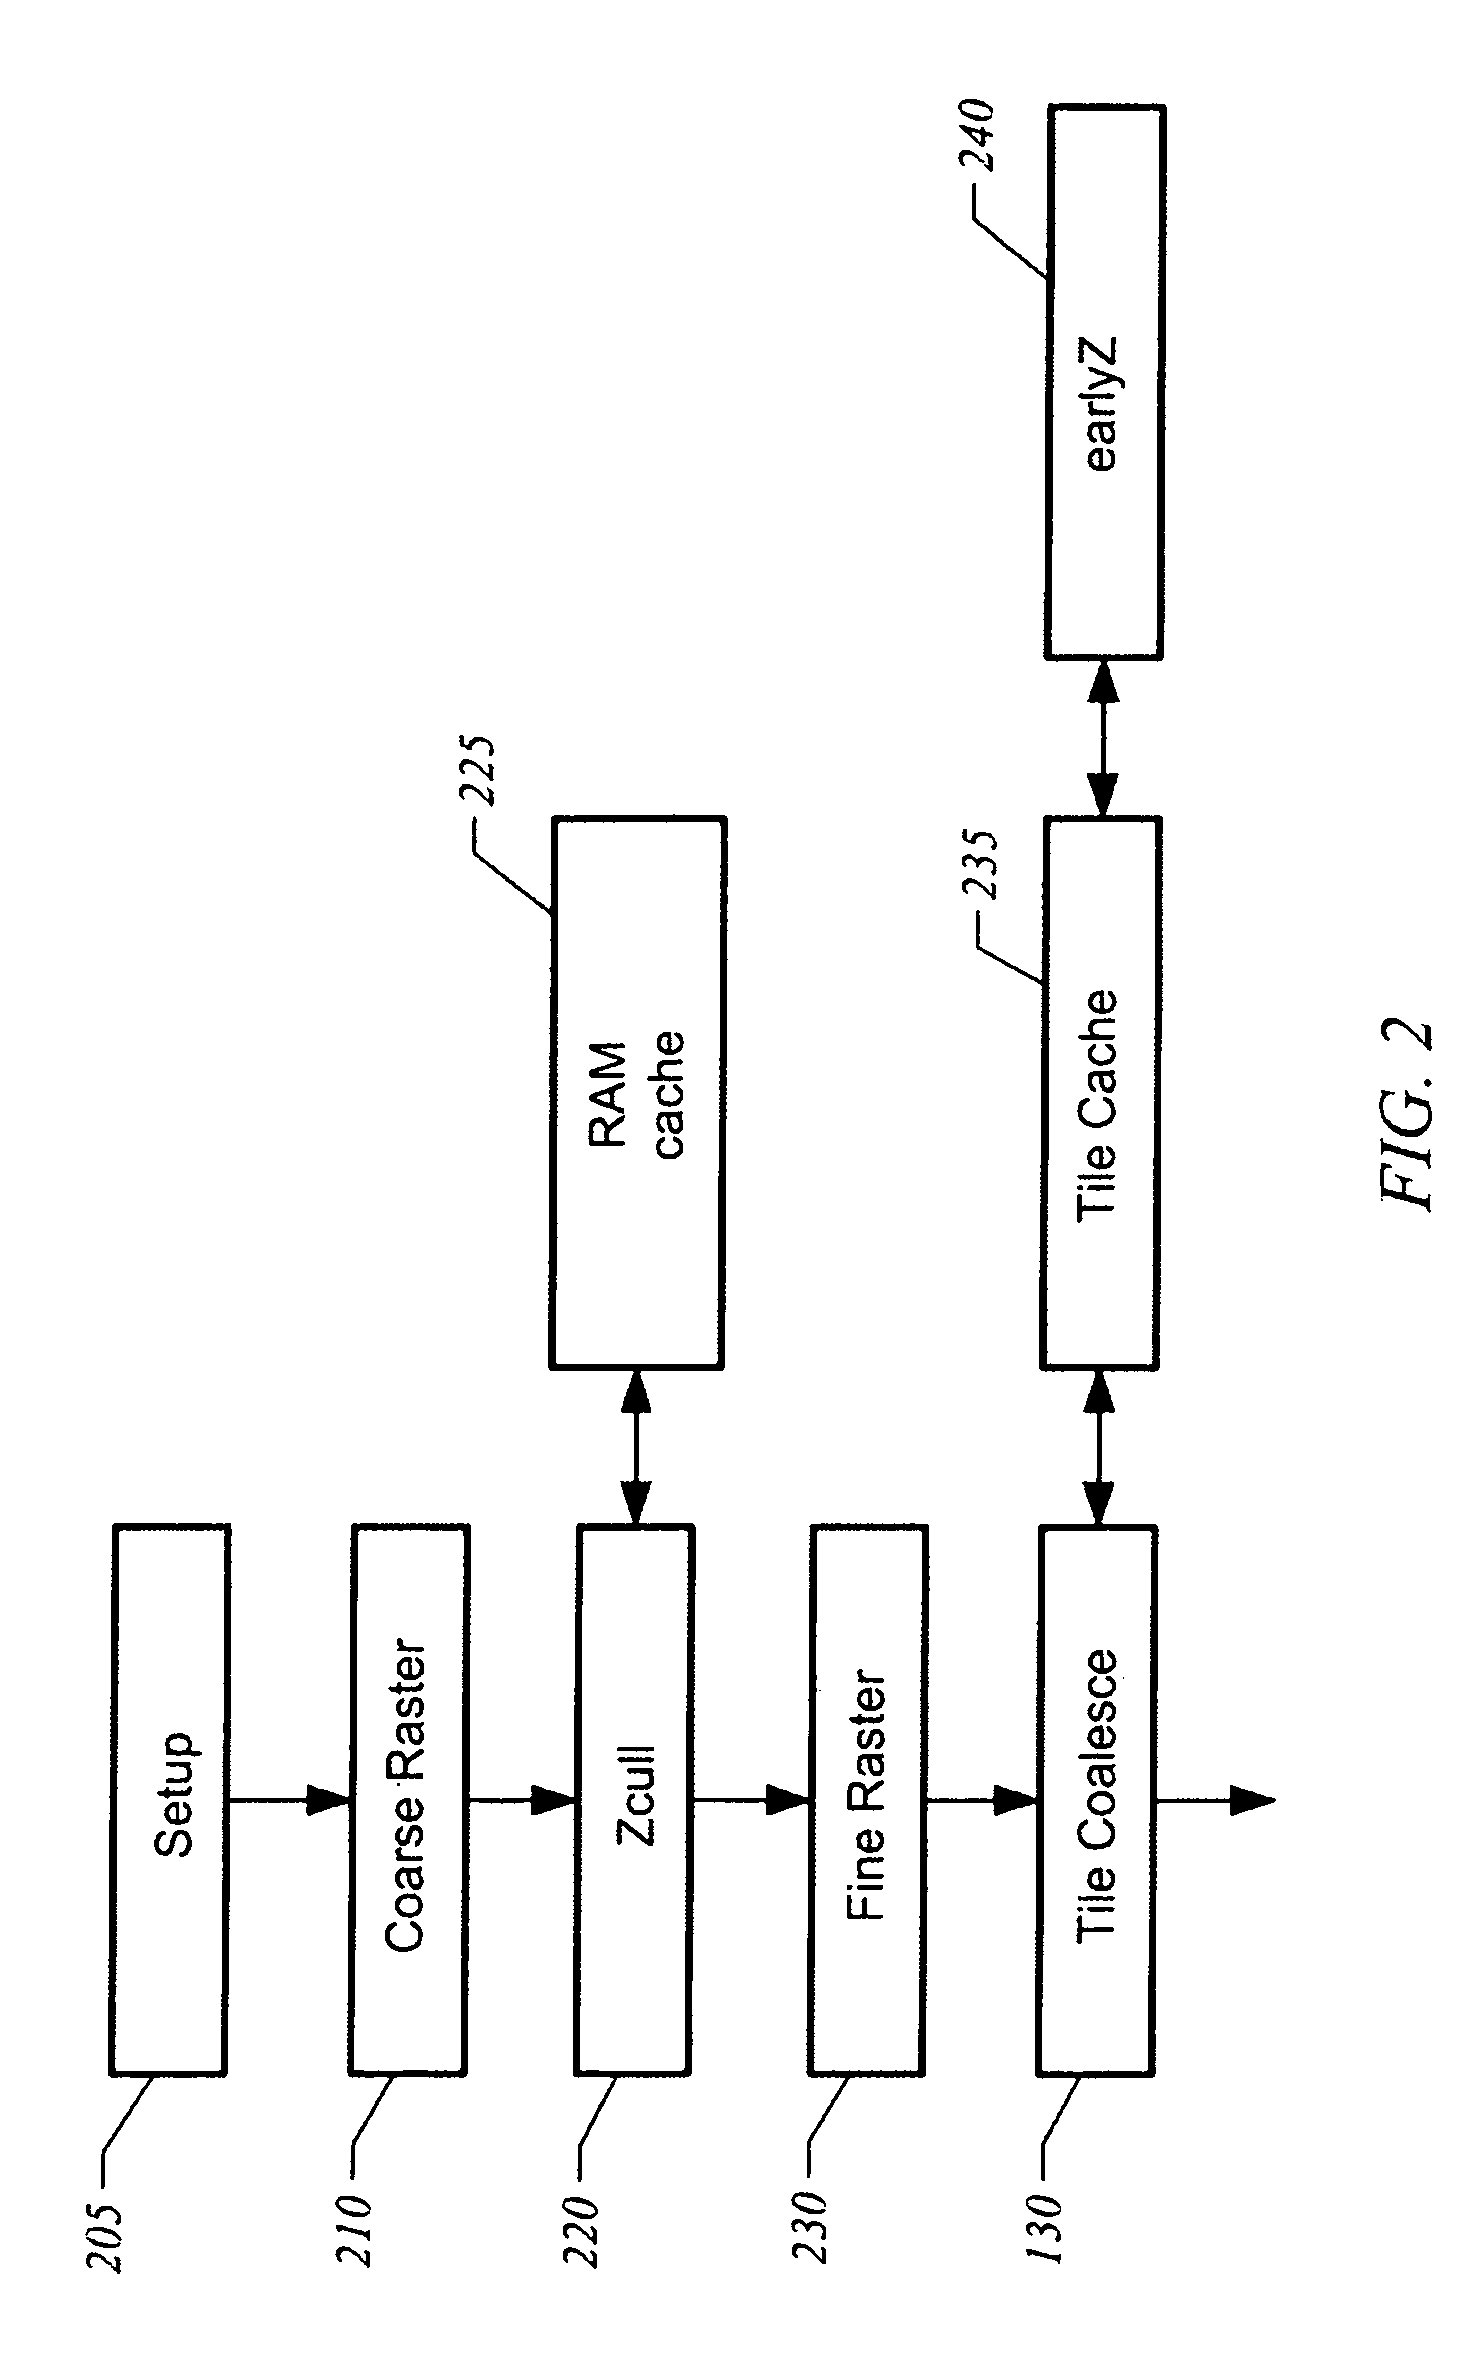 Apparatus and method for raster tile coalescing